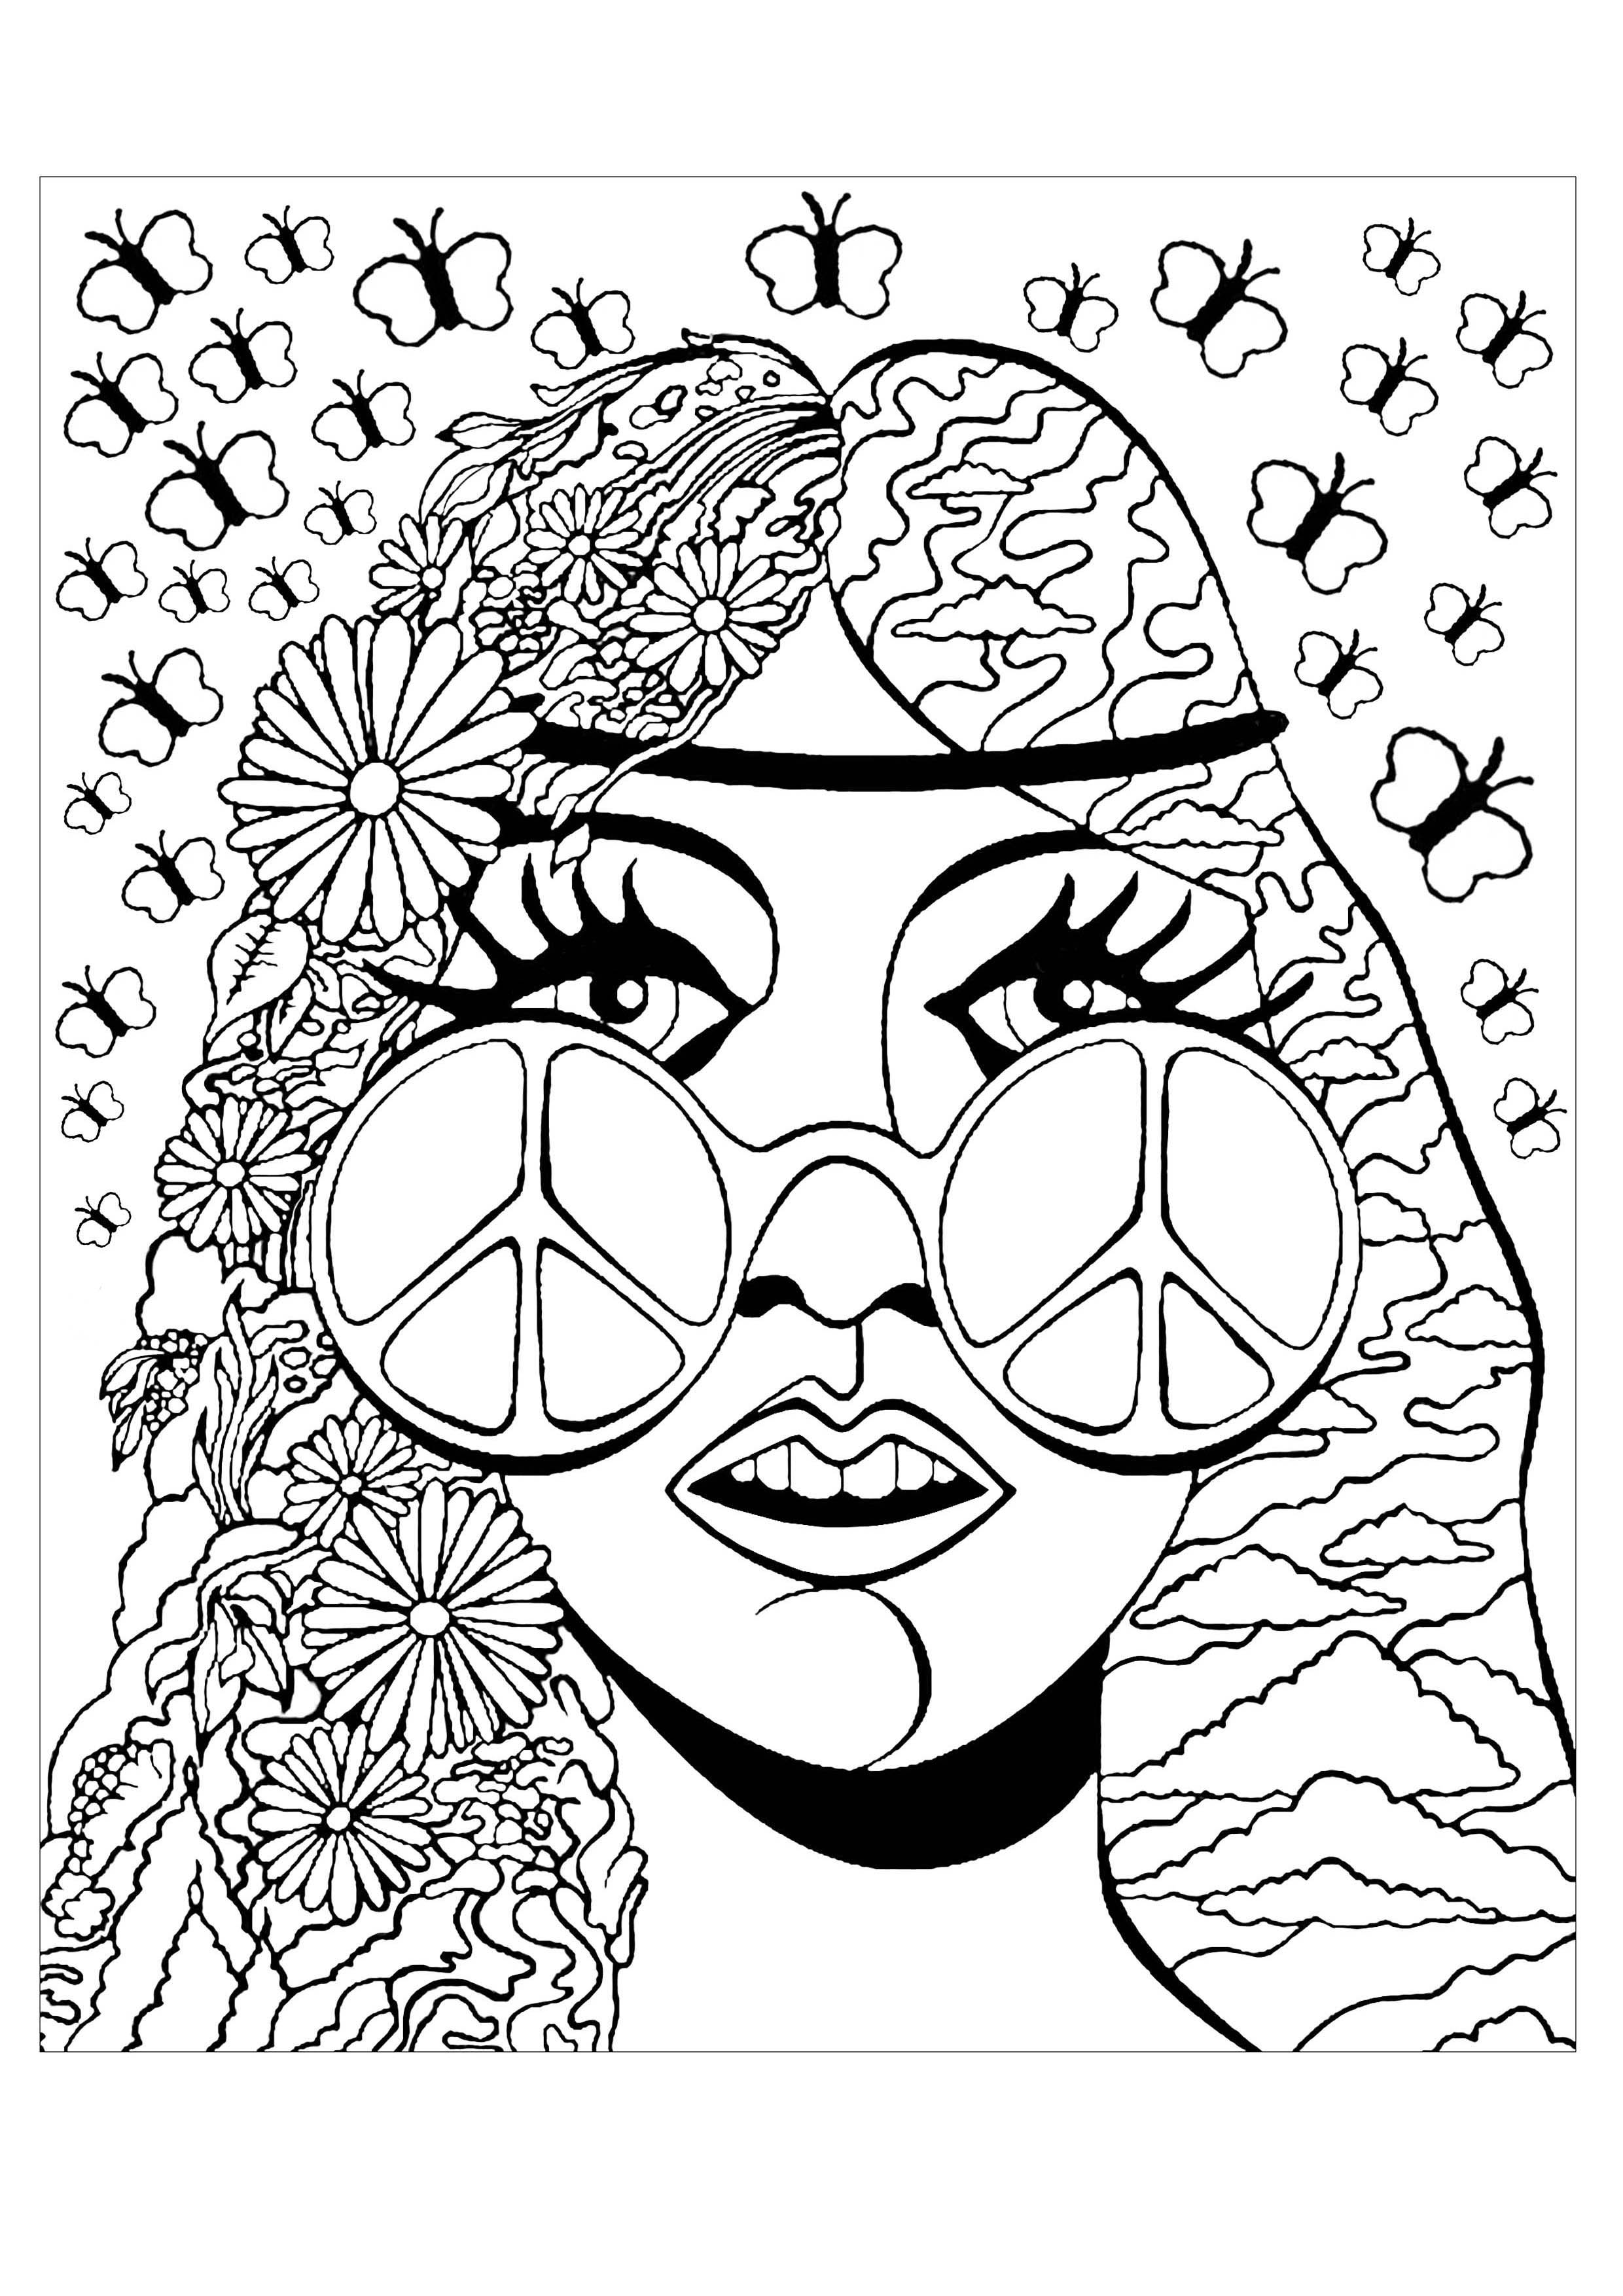 Psychedelic girl with peace & love glasses, and butterflies